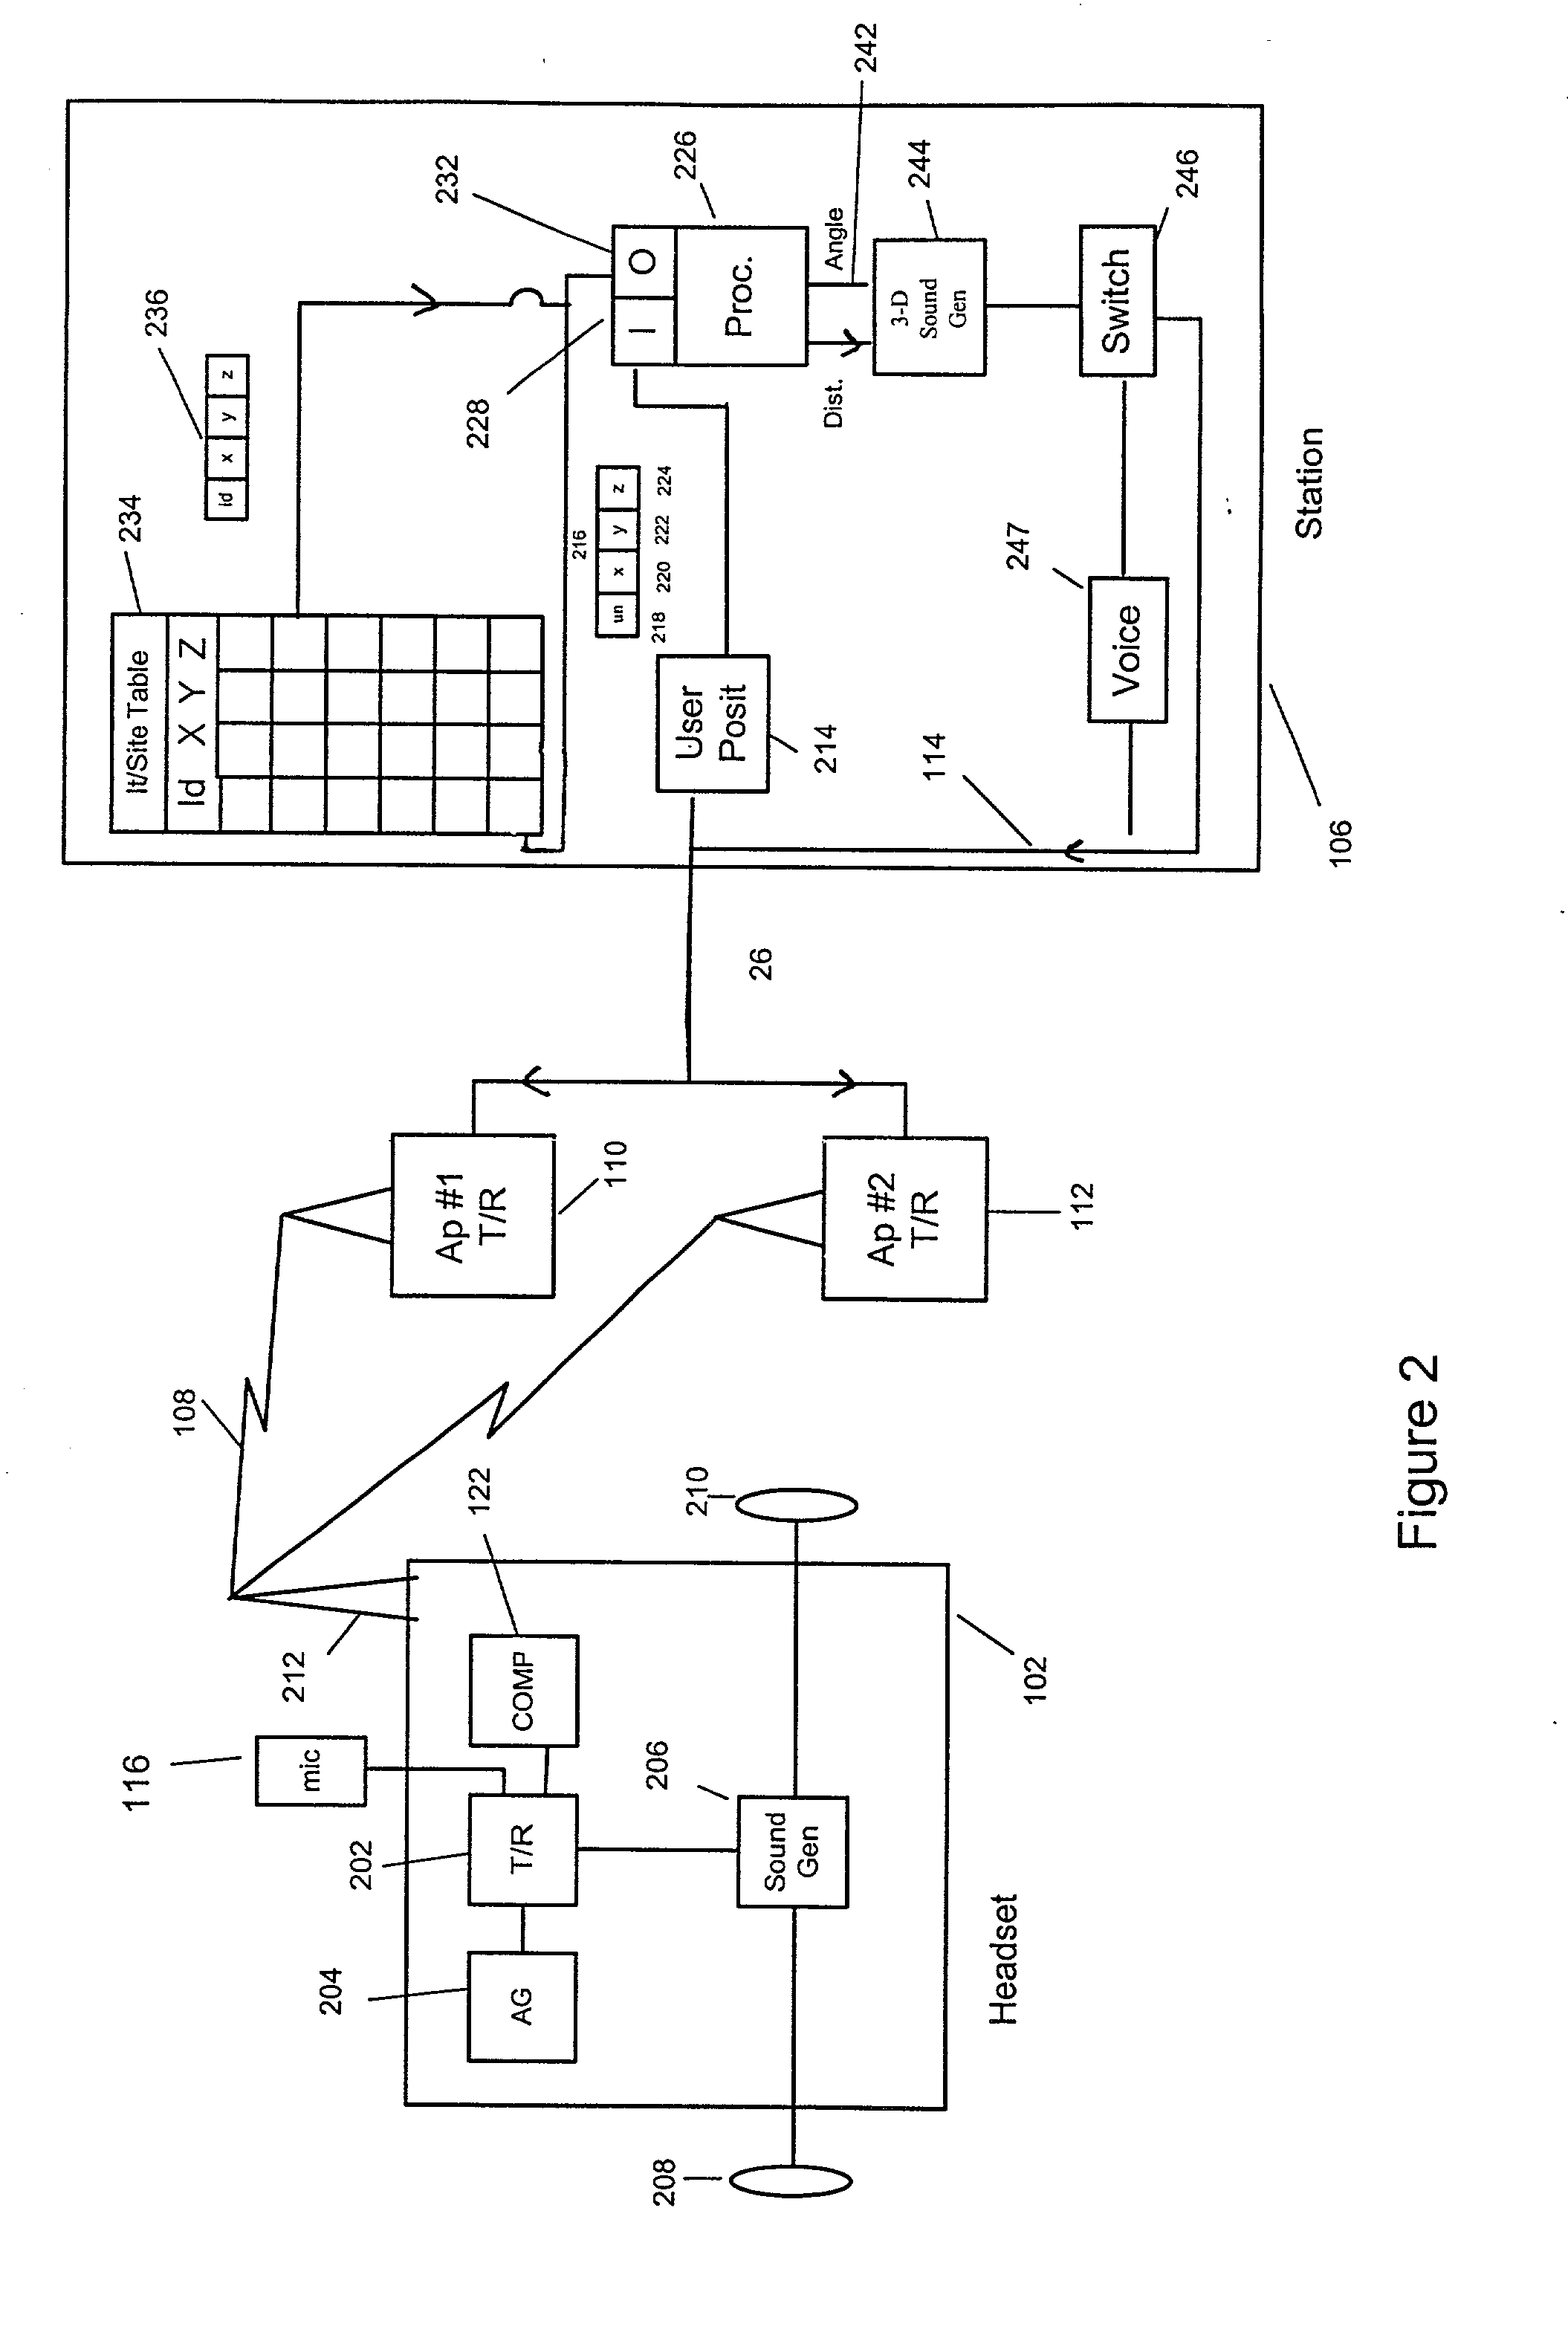 Three dimensional (3-D) object locator system for items or sites using an intuitive sound beacon: system and method of operation